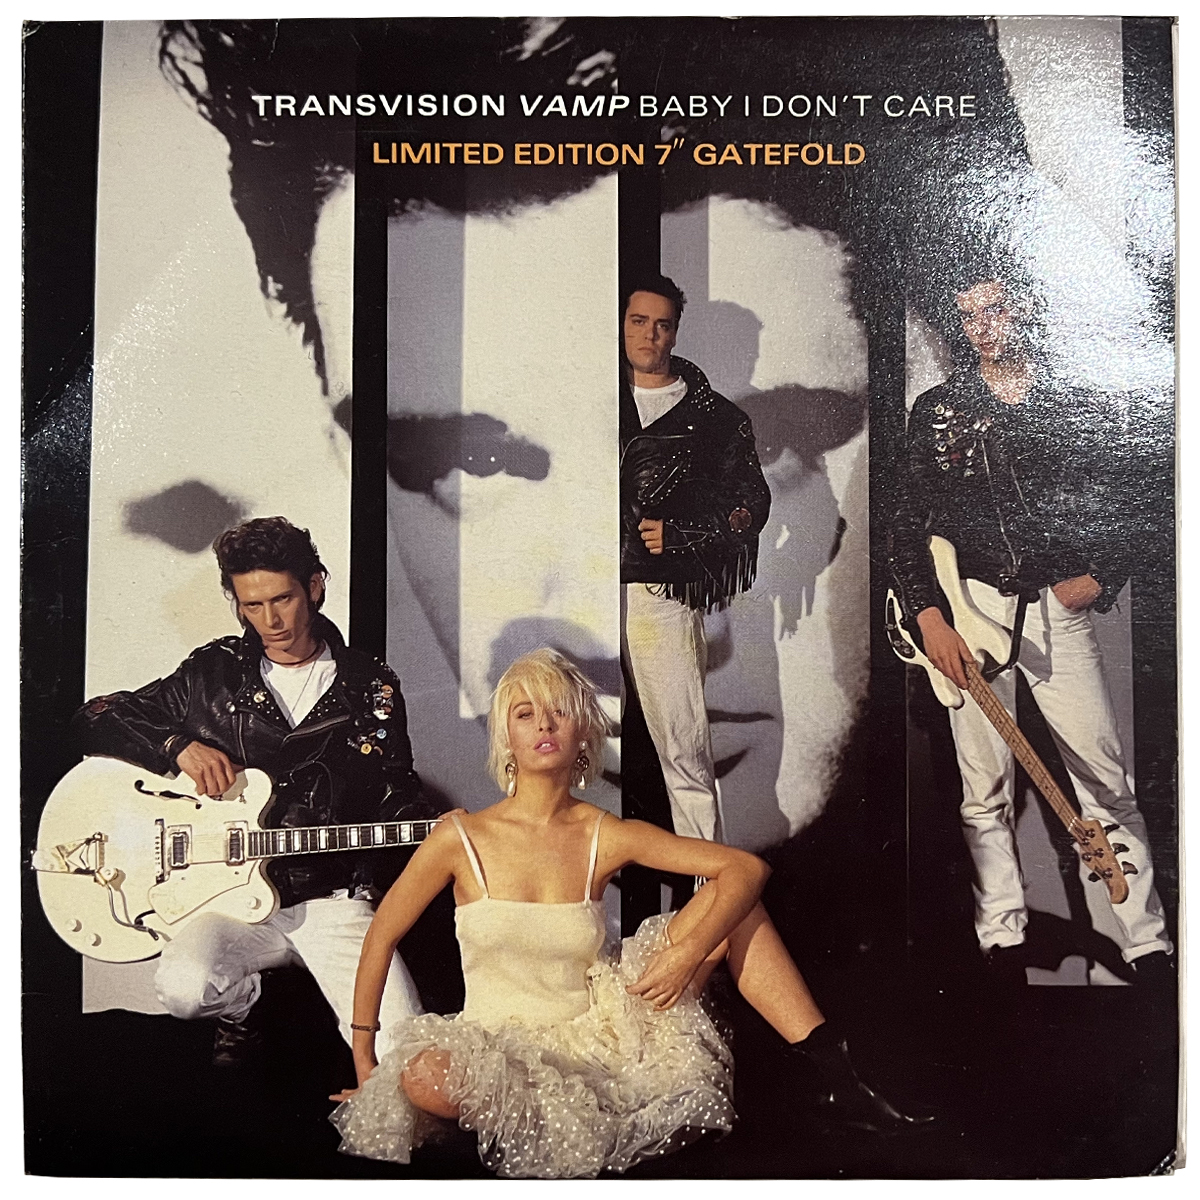 TRANSVISION VAMP ‘BABY, I DON’T CARE’ GATEFOLD, 7” VINYL 1990 *SIGNED & PERSONALIZED